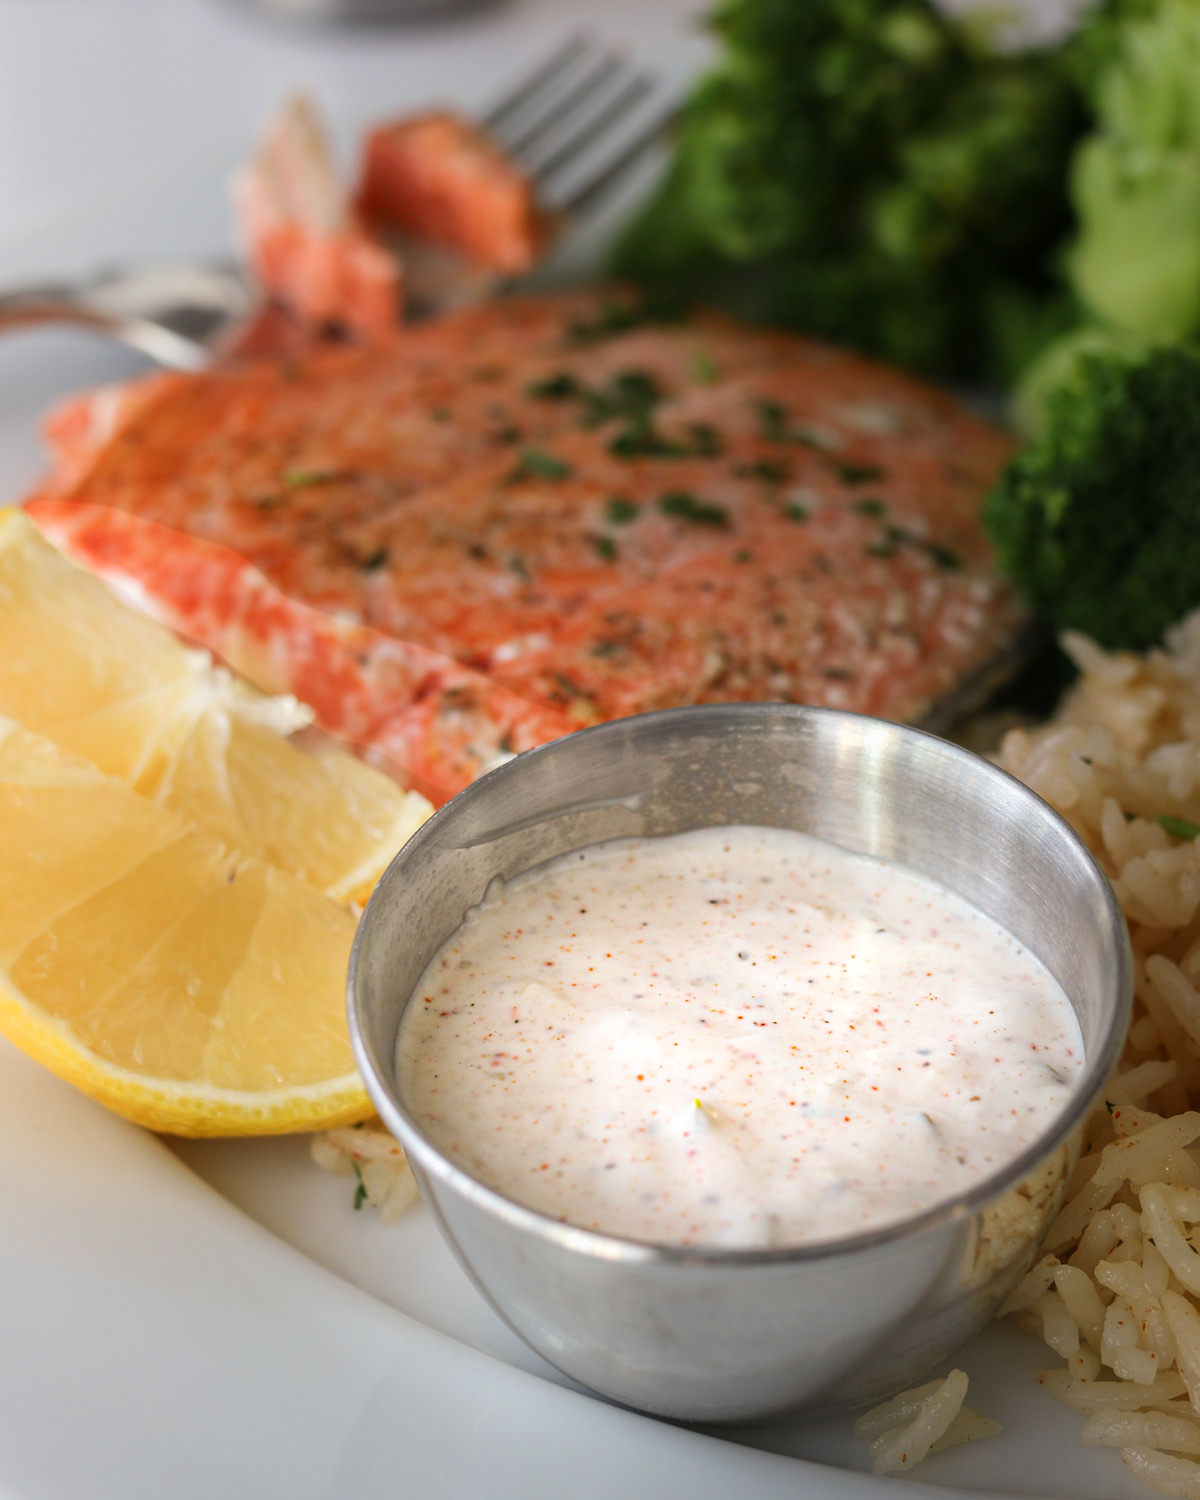 a dish of remoulade on a plate of salmon, rice, and broccoli.